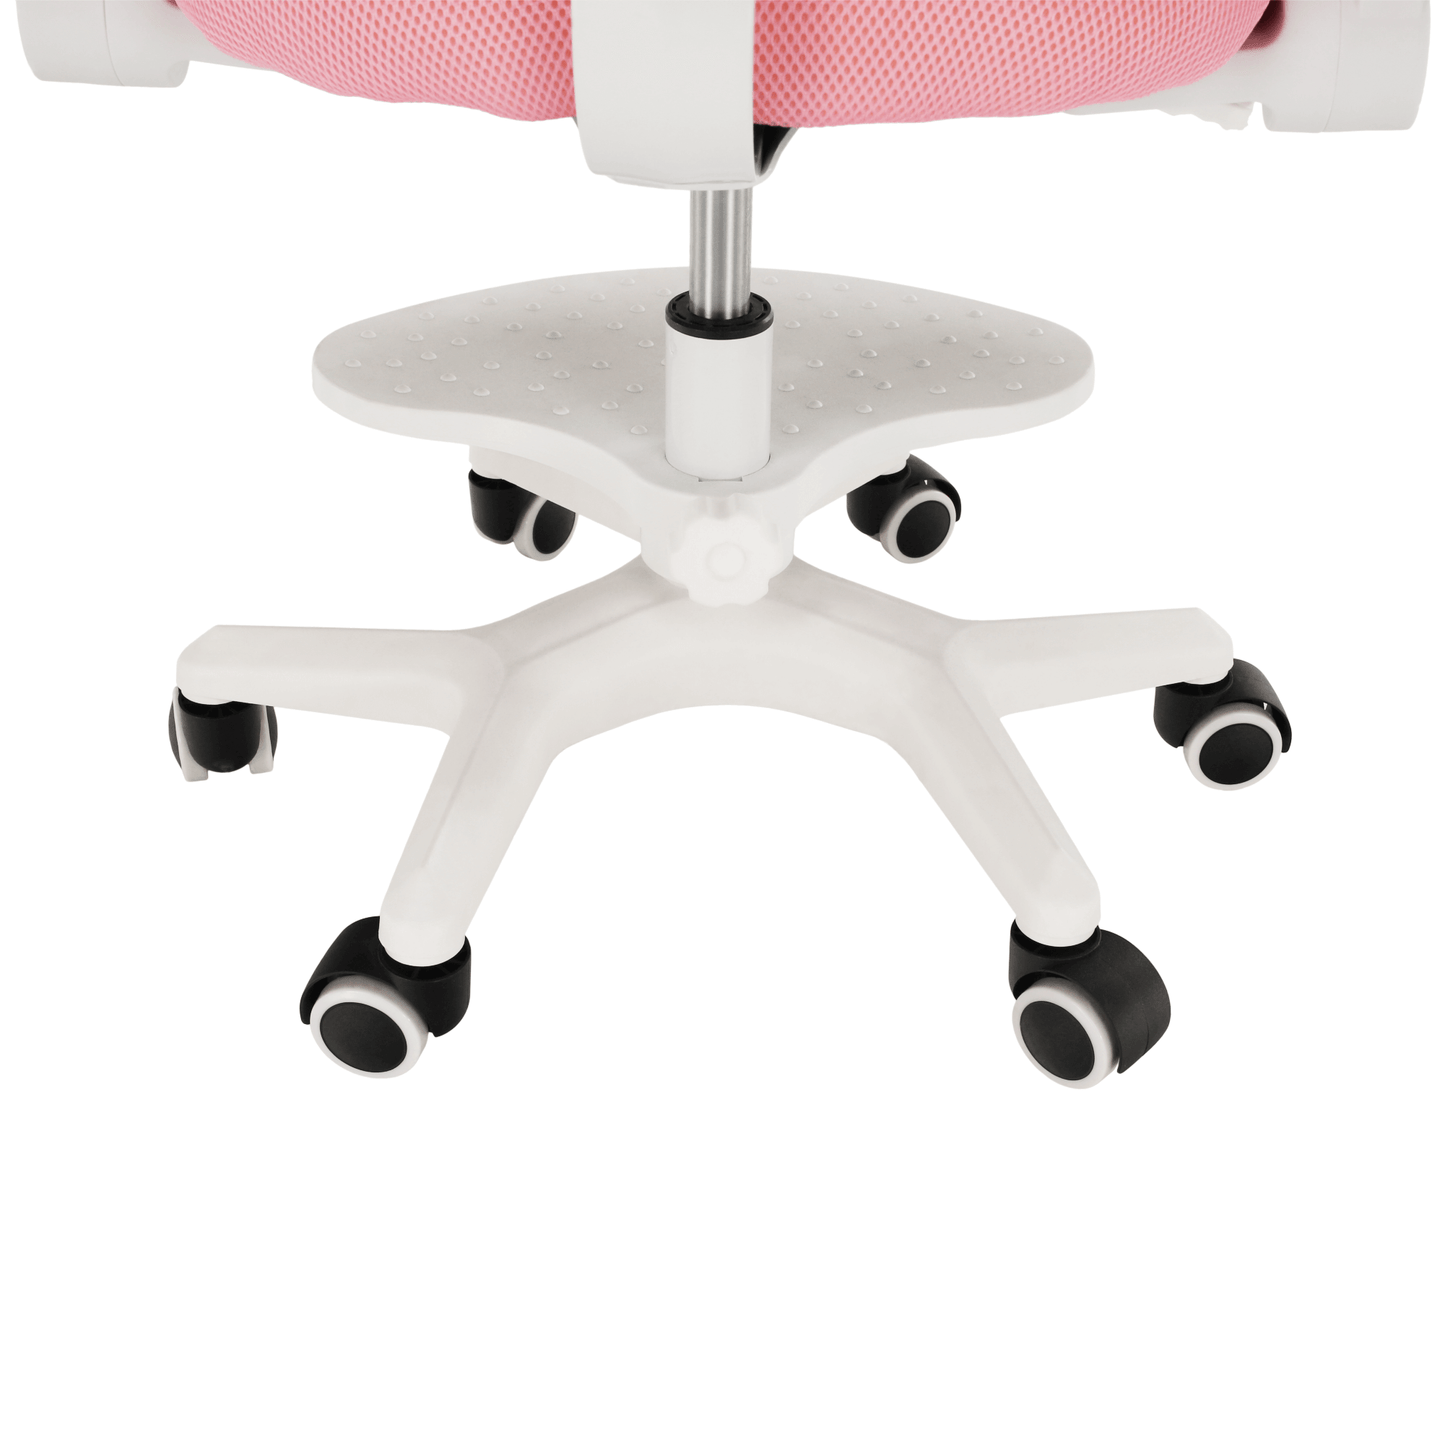 Adjustable chair with footrest and straps, pink/white, ANAIS